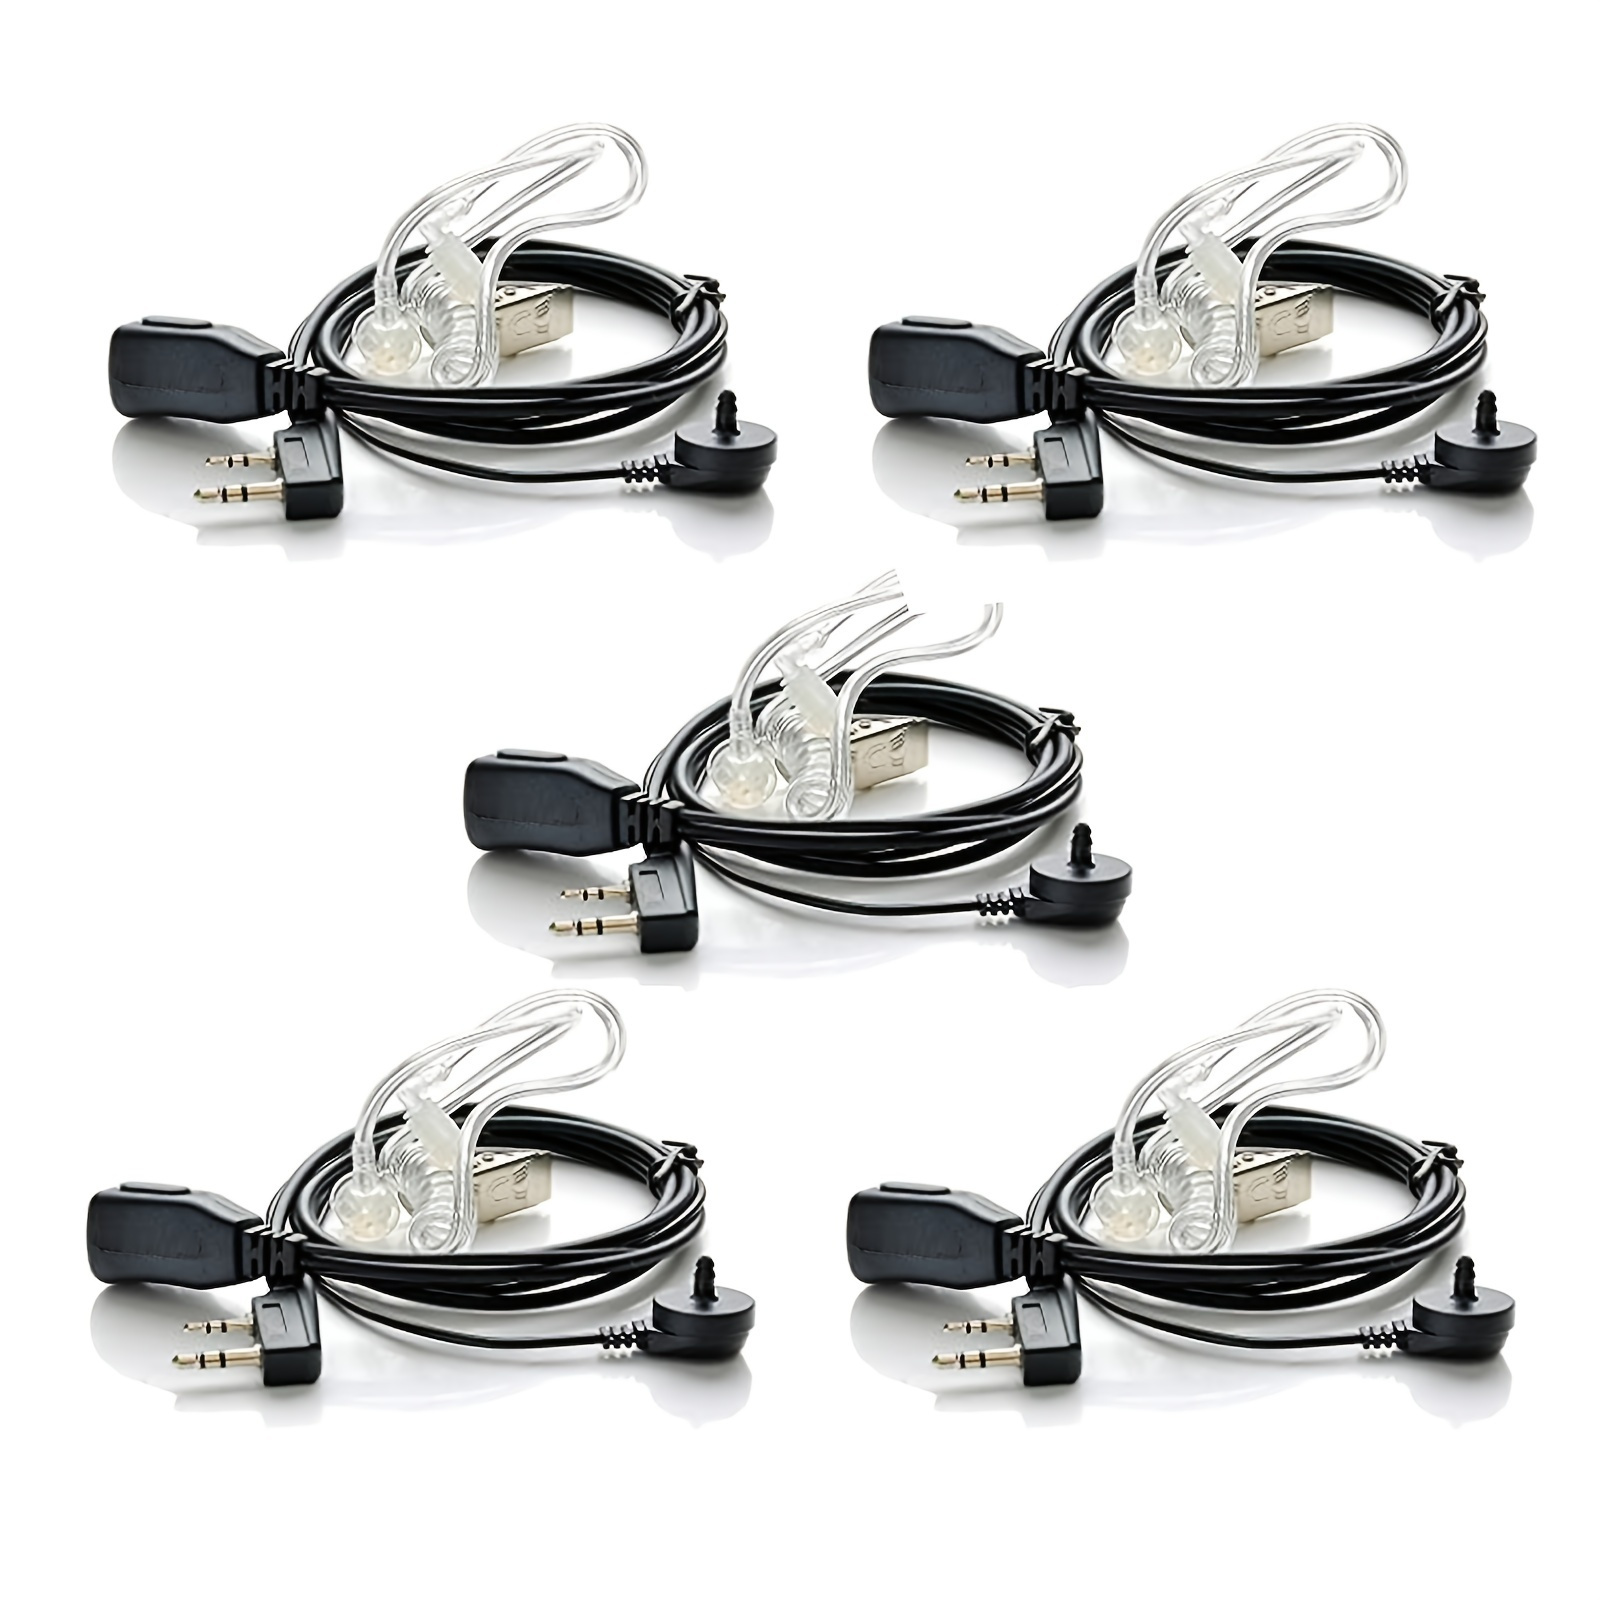 

5pcs Earpiece With Mic 2 Pin Acoustic Tube Headset Compatible With Uv-5r 888s 2 Way Radio